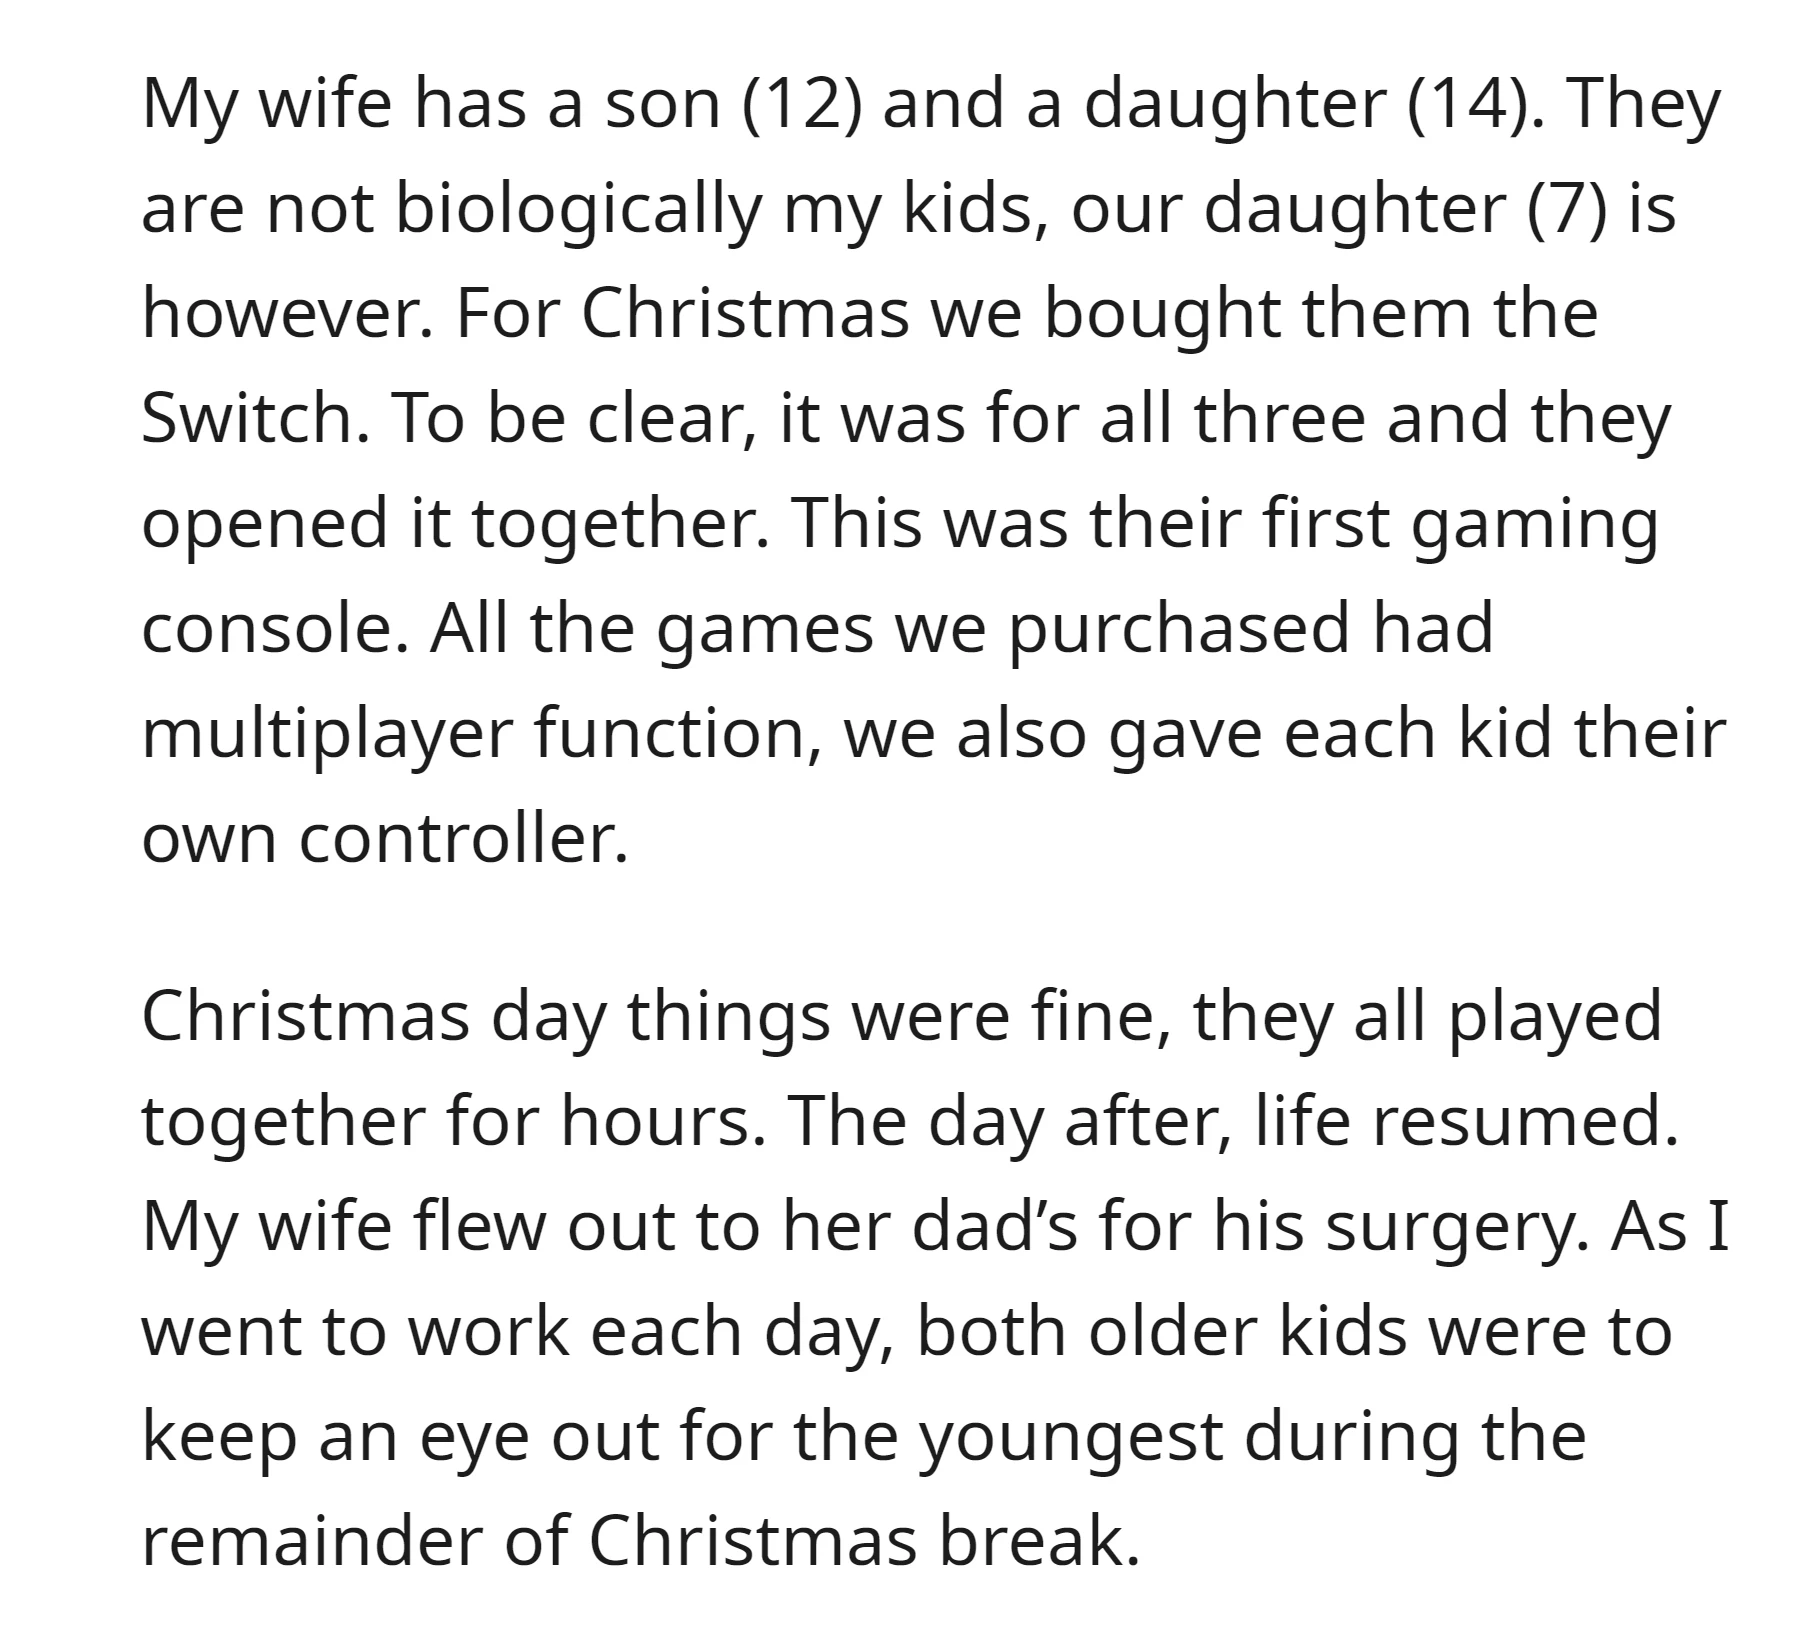 Because OP's wife had to take care of her dad at hospital and OP was busty at work, her kids watched their youngest step sibling